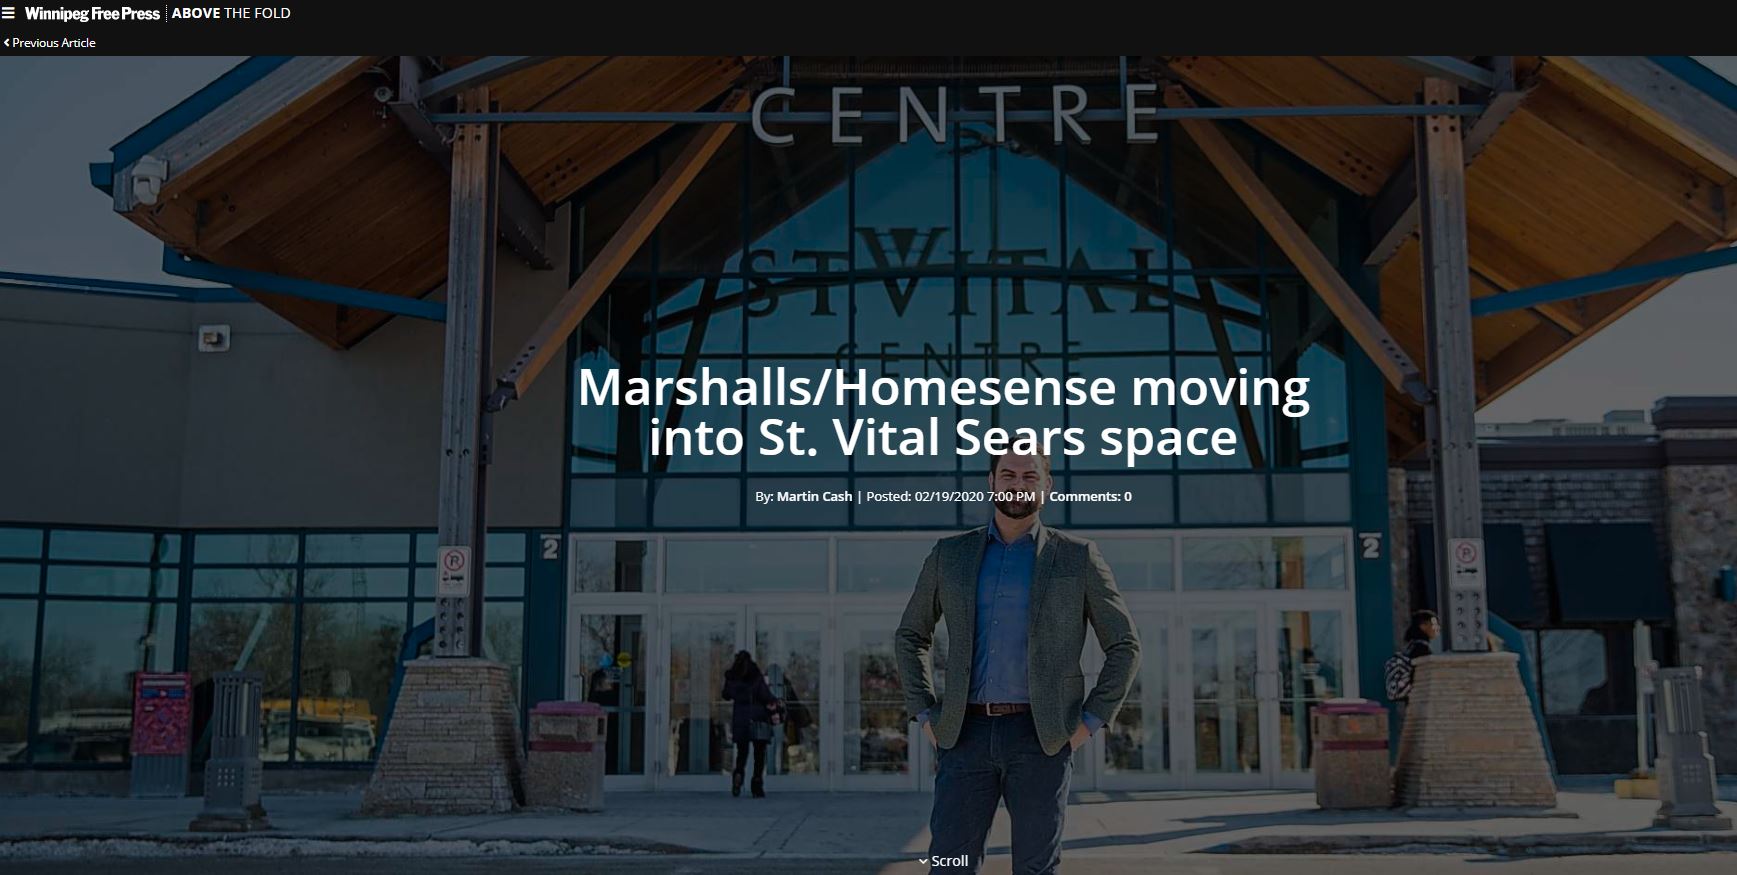 Screenshot of Winnipeg Free Press article announcing Marshalls/Homesense move into St. Vital Centre with the mall's main entrance in the background.